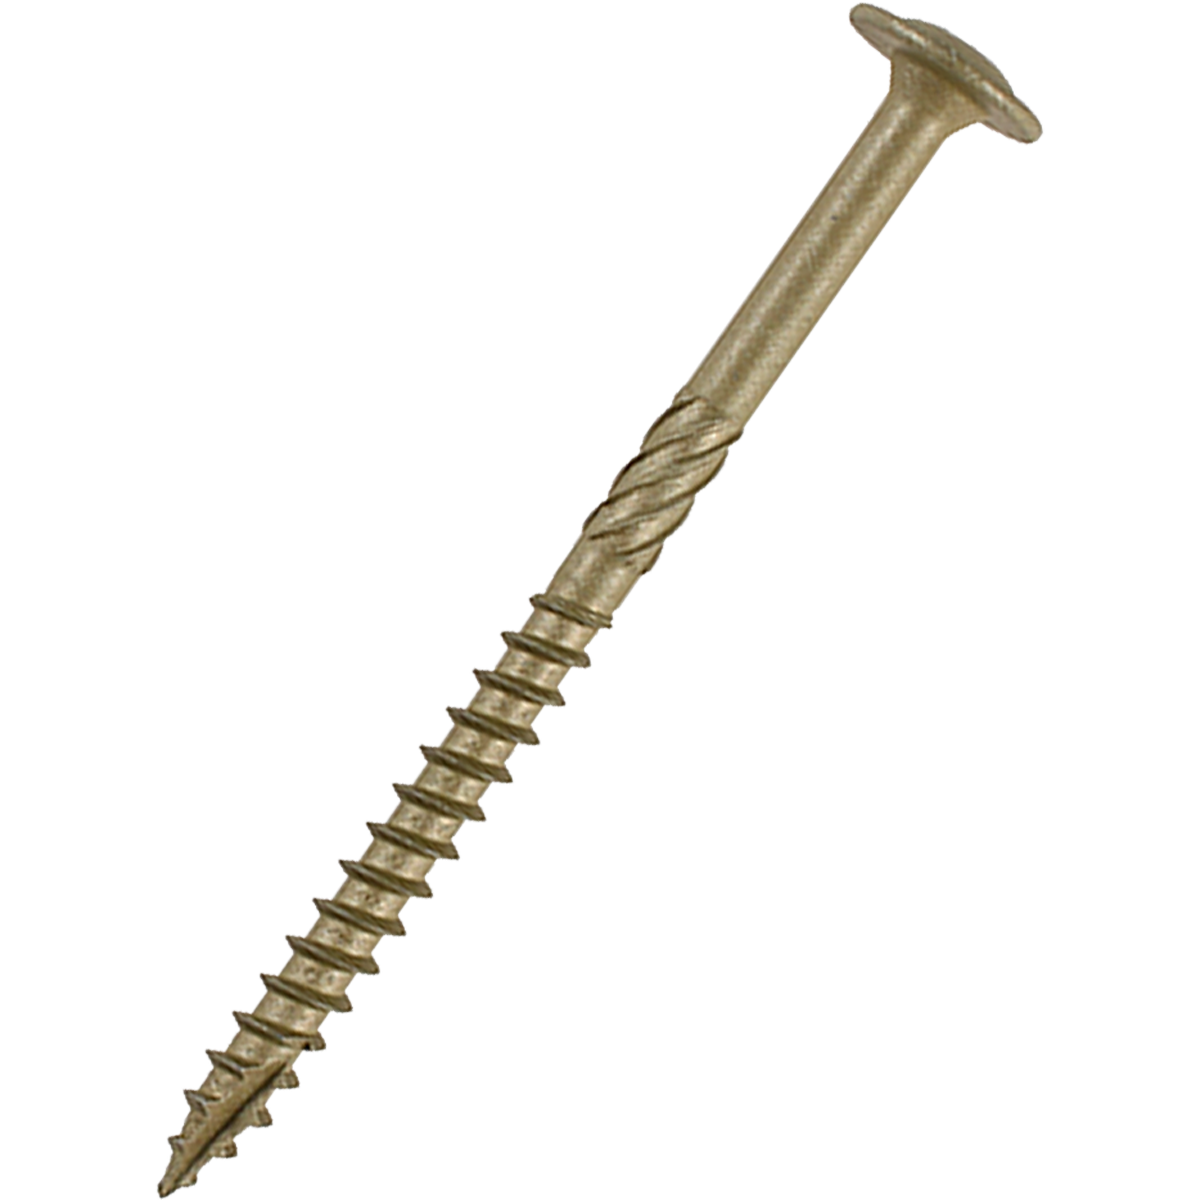 Timber frame construction screws with a wafer head and a Torx recess at competitive prices.